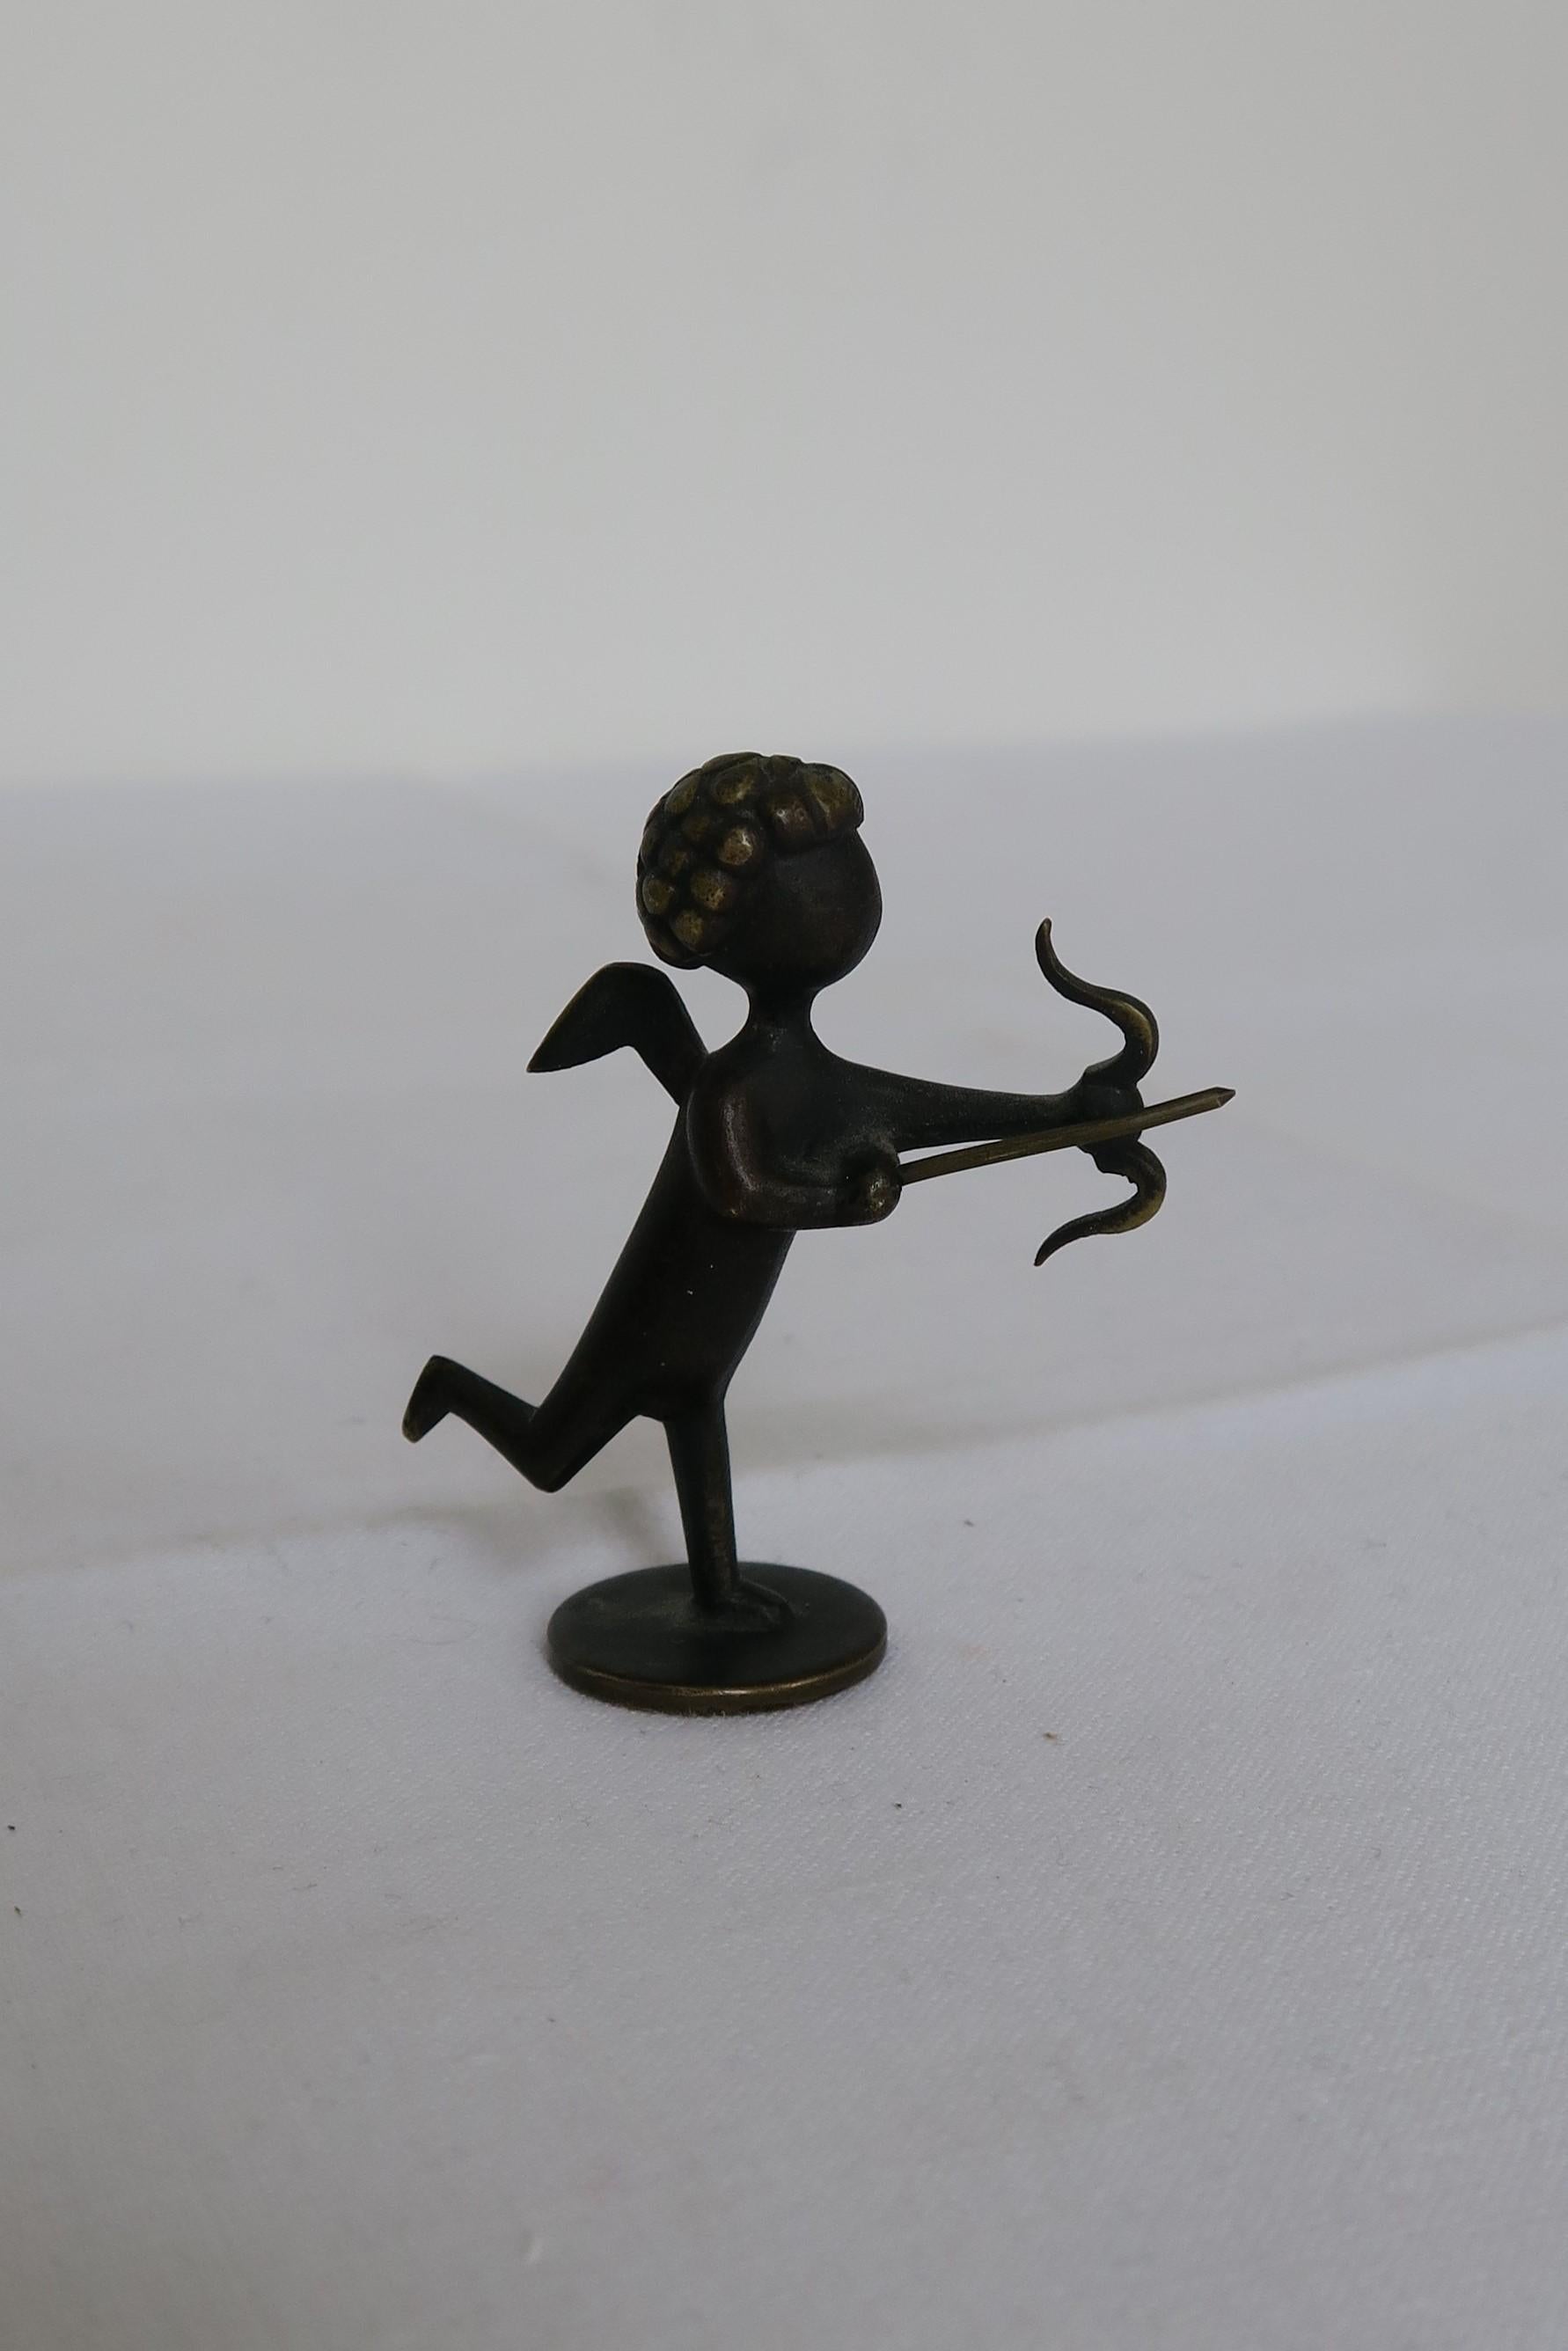 The item on sale is an original vintage bronze figurine. It was designed and manufactured by the Austrian workshops of Hagenauer. The Figurine represents a little cupid with bow and arrow in Mid-Century Modern style. It is stamped and in presteen